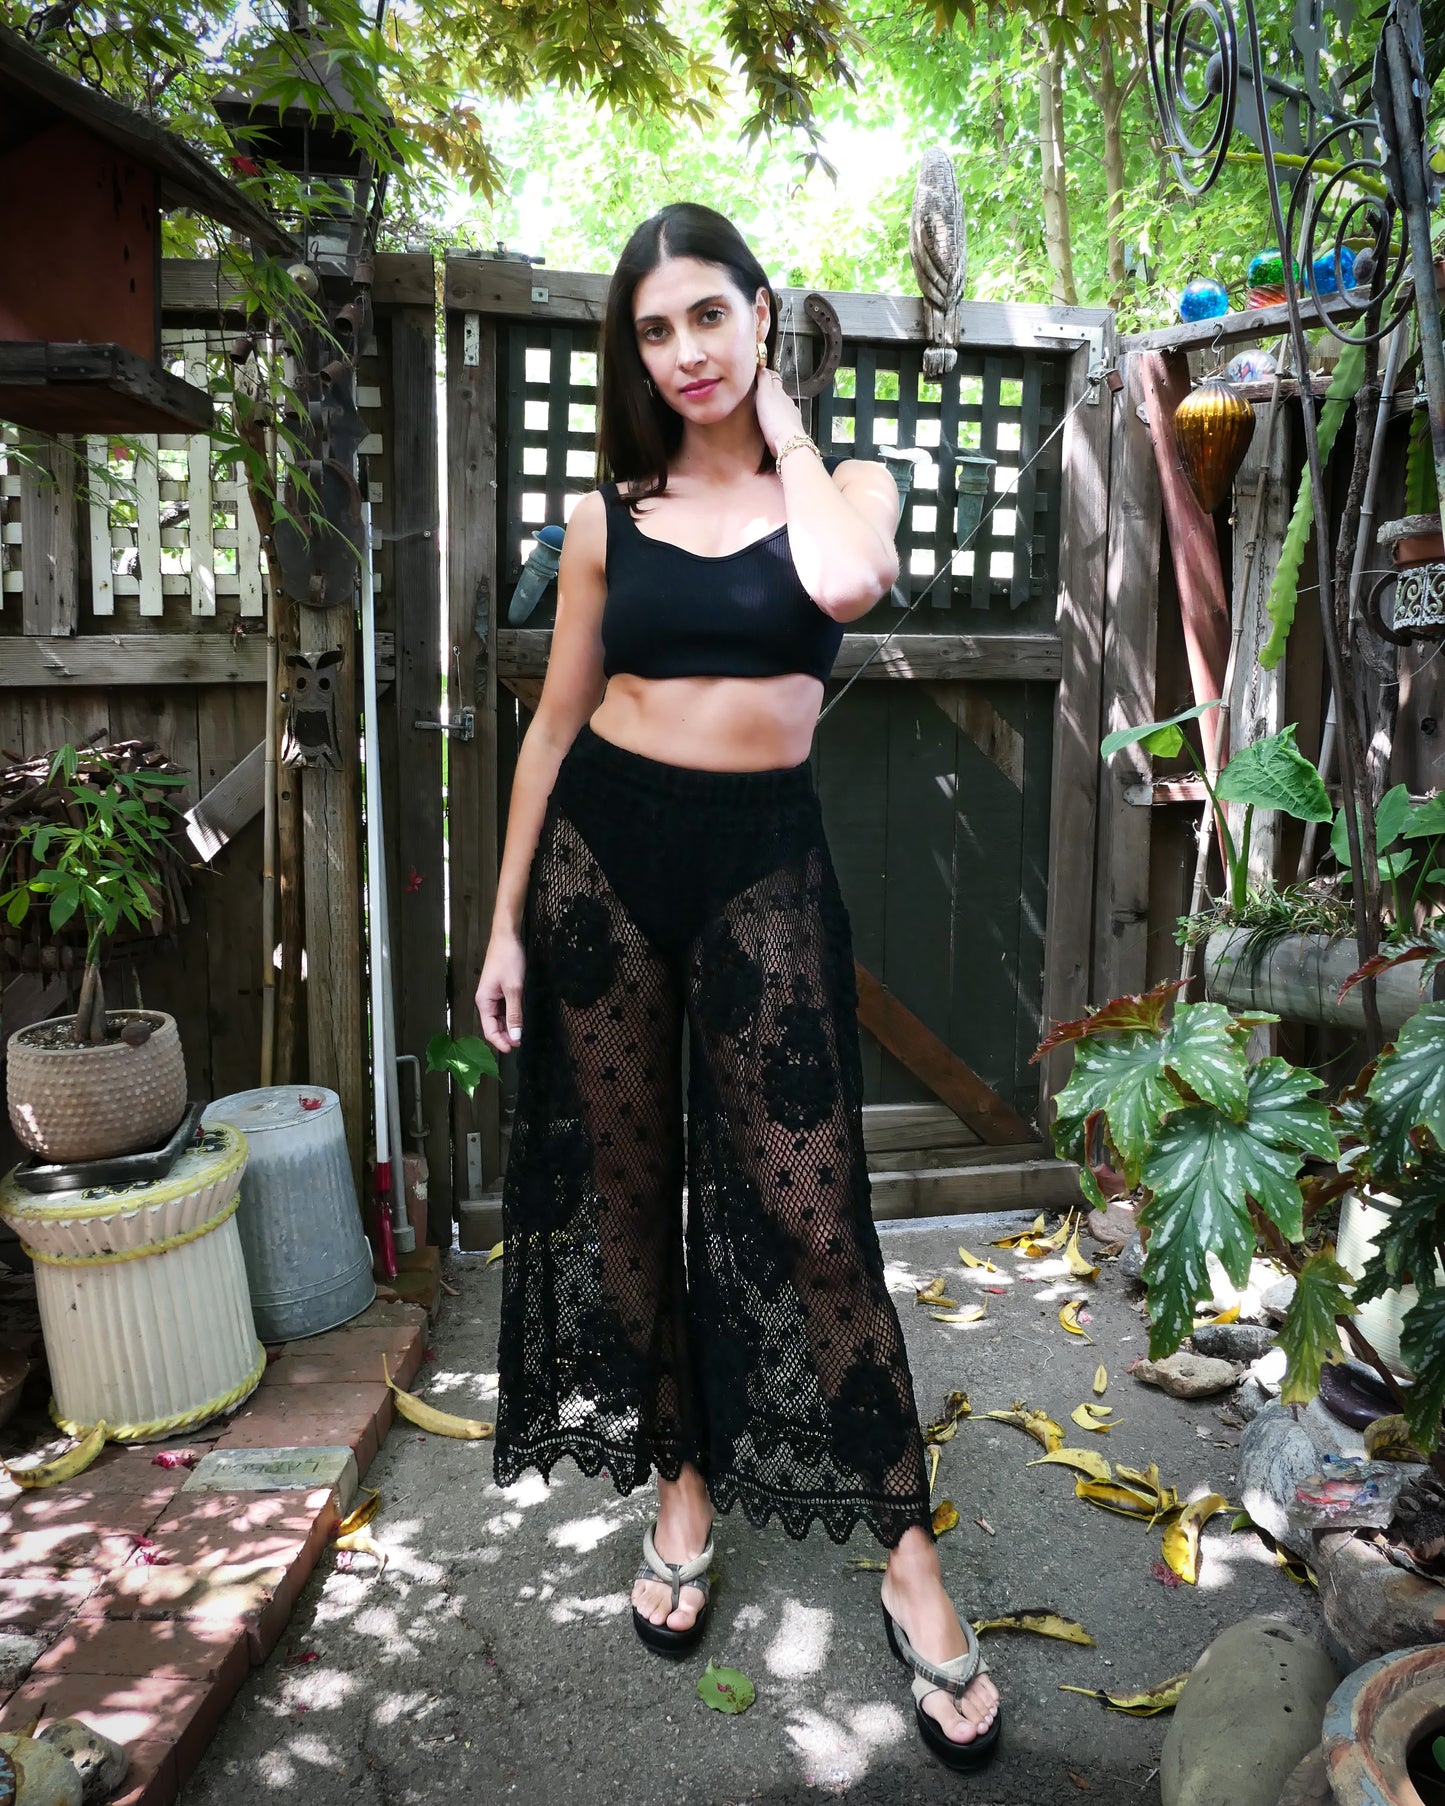 Our popular hand crocheted, lightweight, and flowy wide leg pants with a comfortable elastic waistband and a paisley and floral motif against a crisscross fishnet backdrop dotted with mini polka-dot flowers. Color: Black